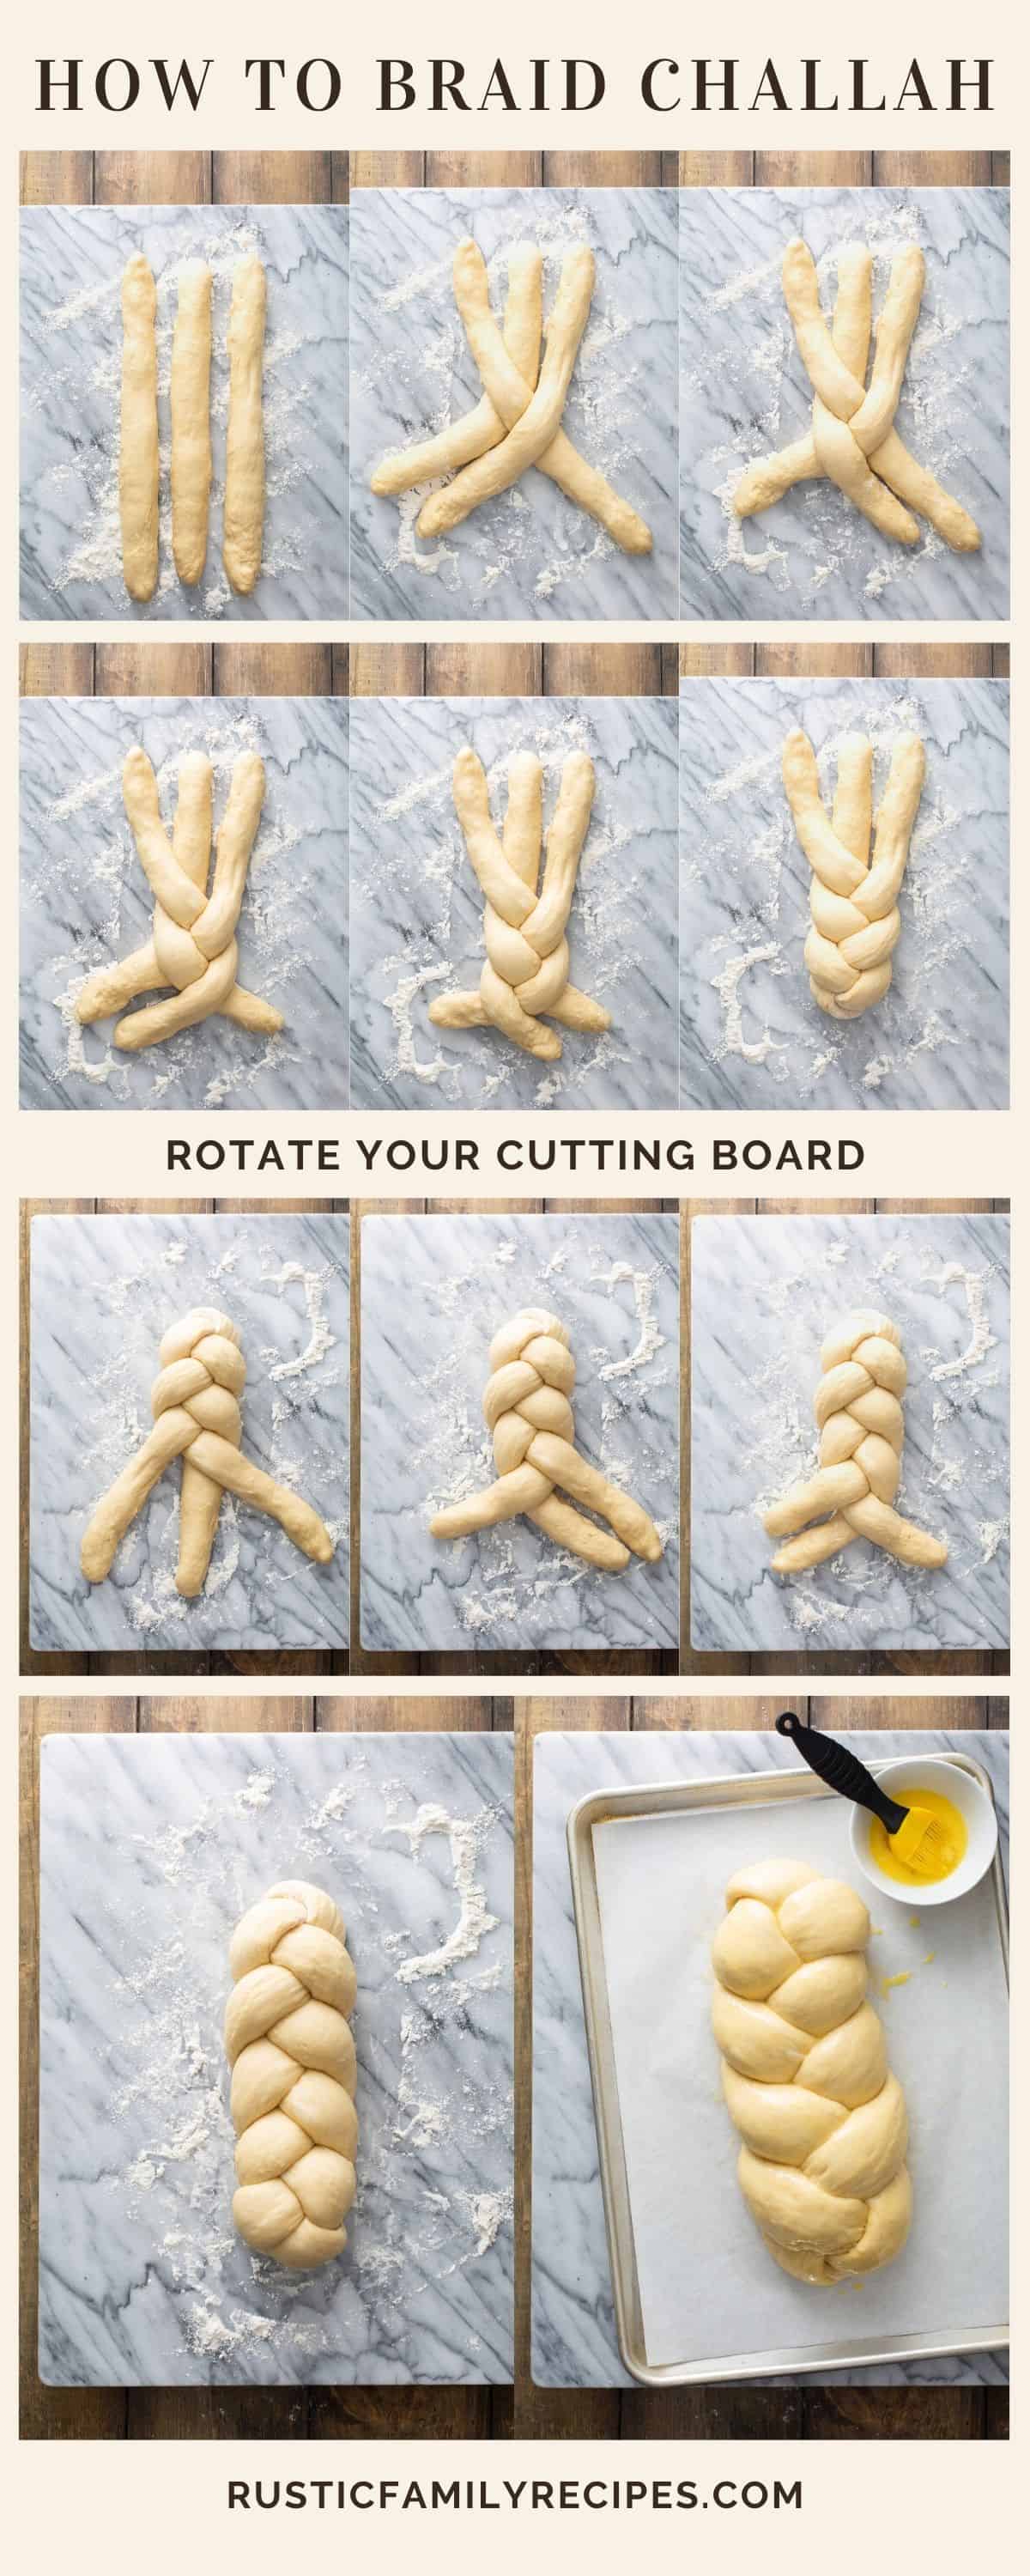 How to Braid Challah step-by-step tutorial